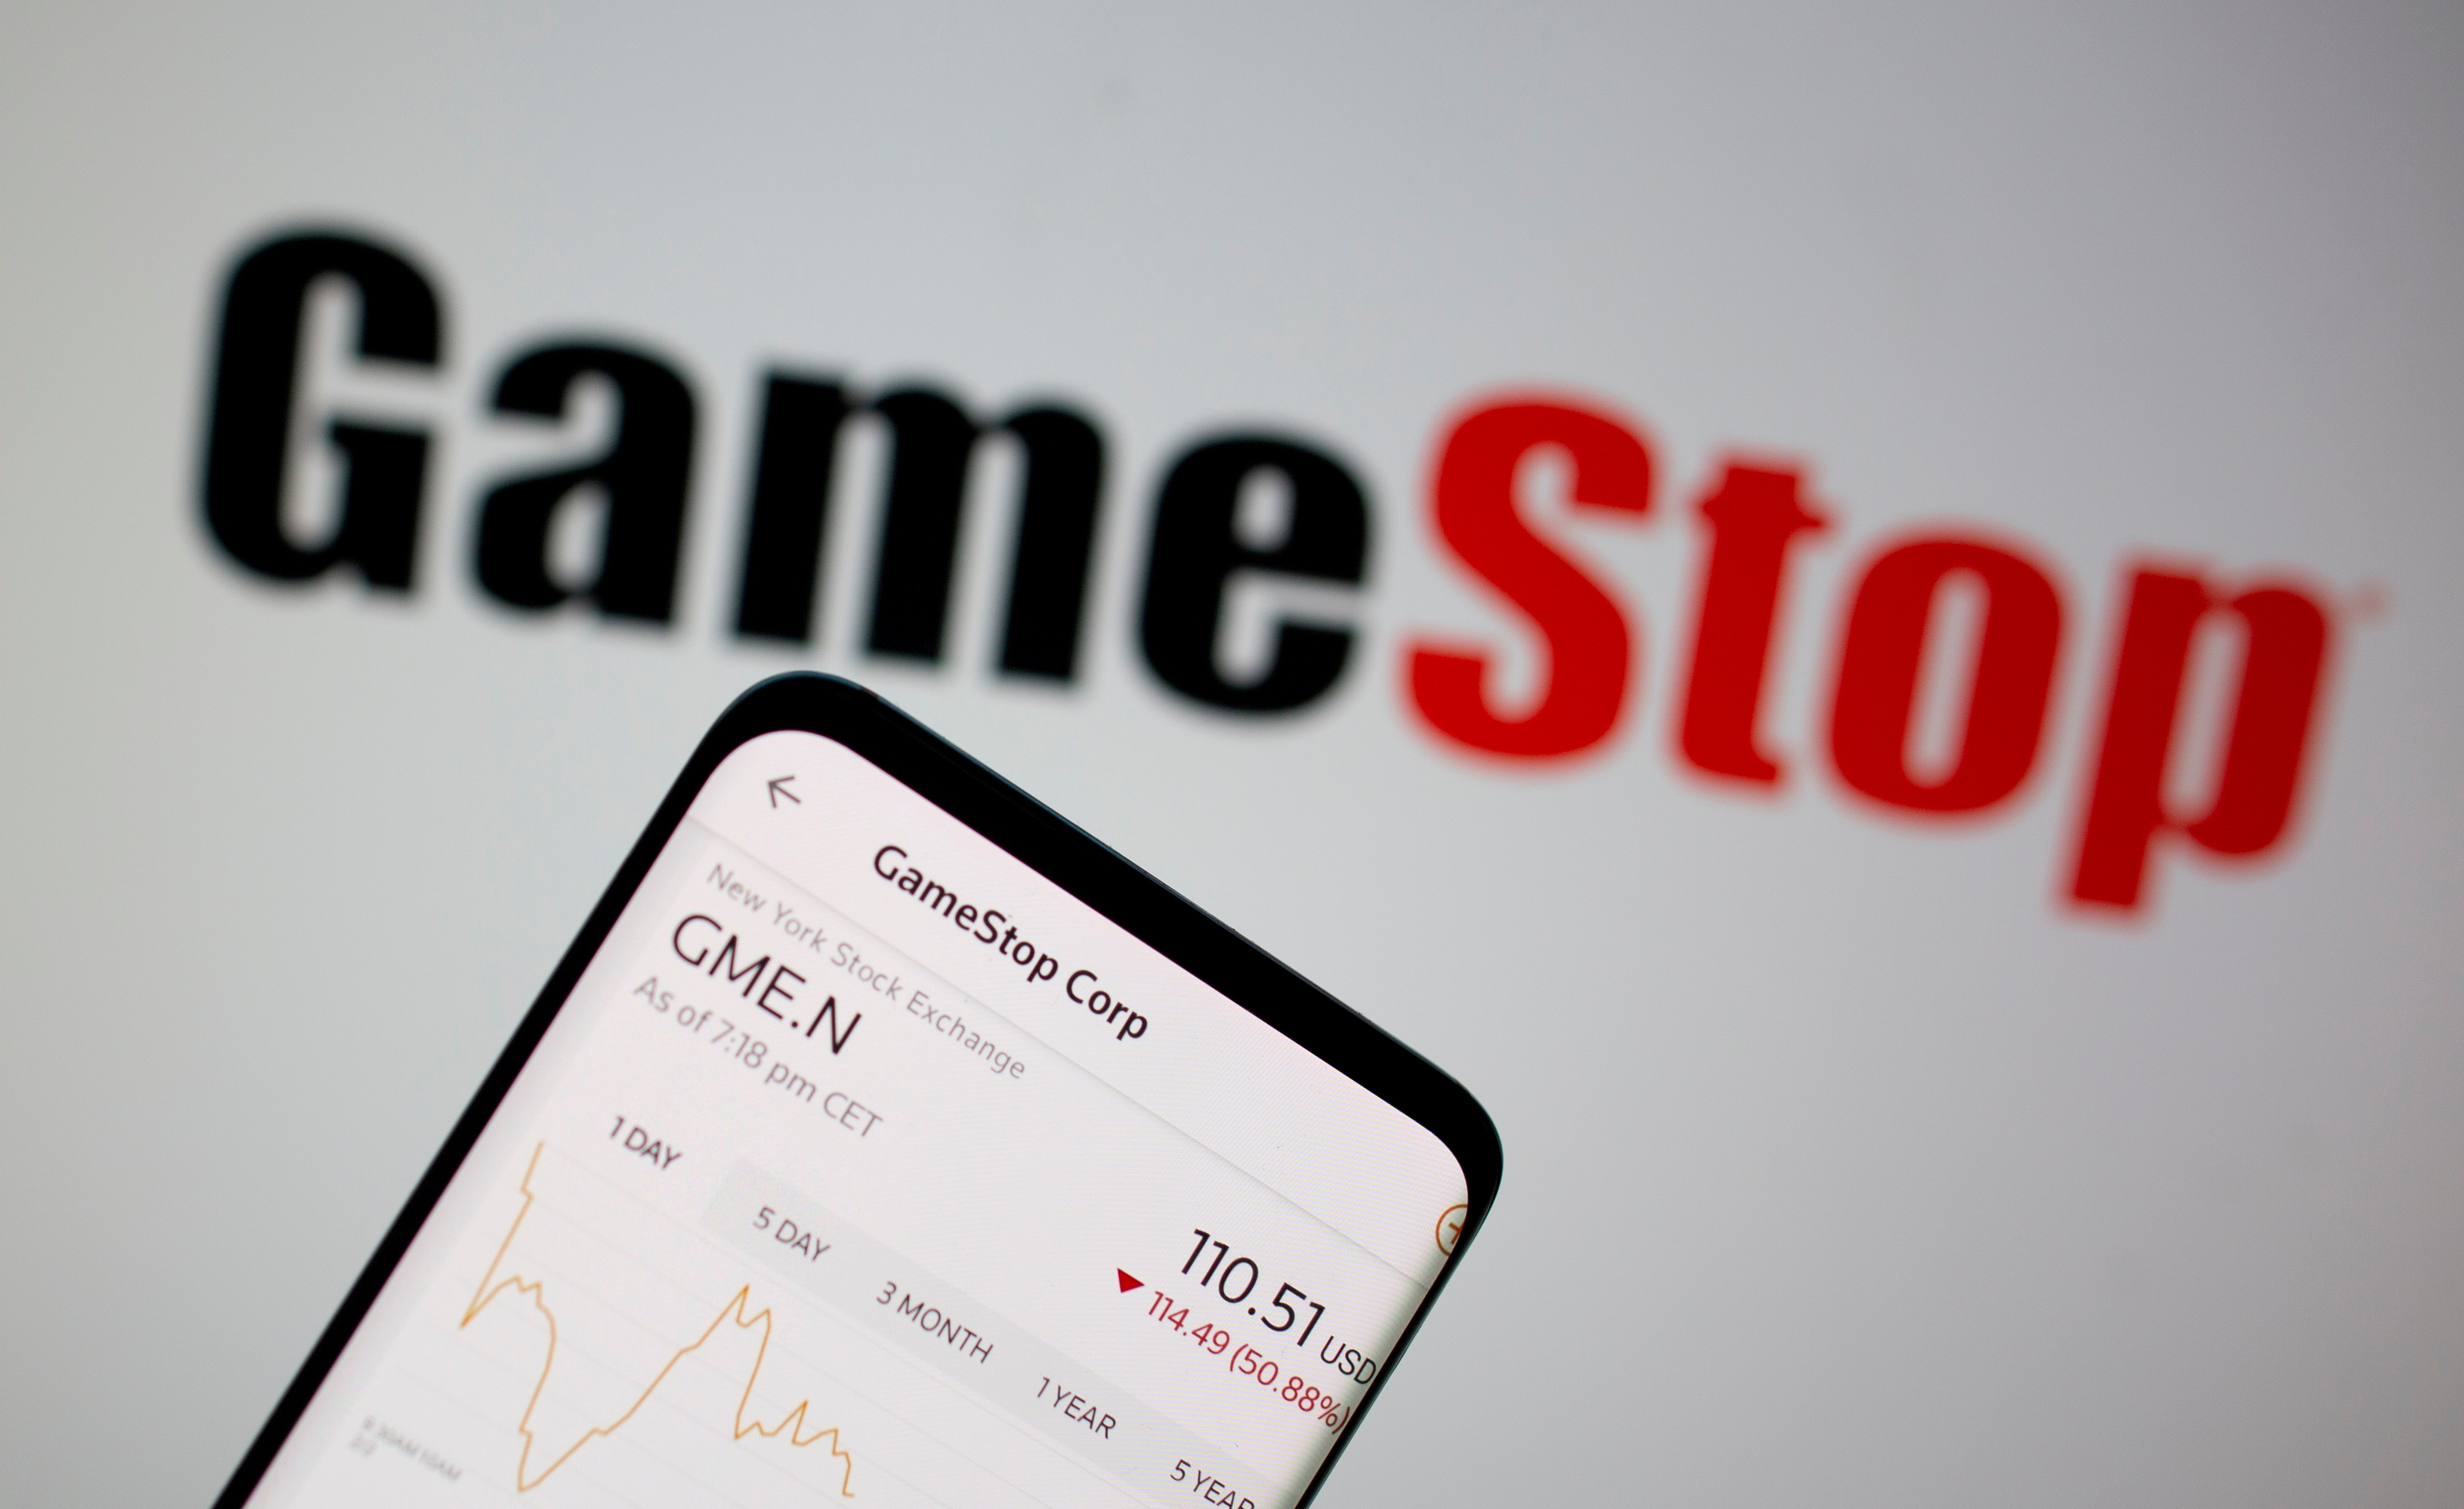 GameStop stock graph is seen in front of the company's logo